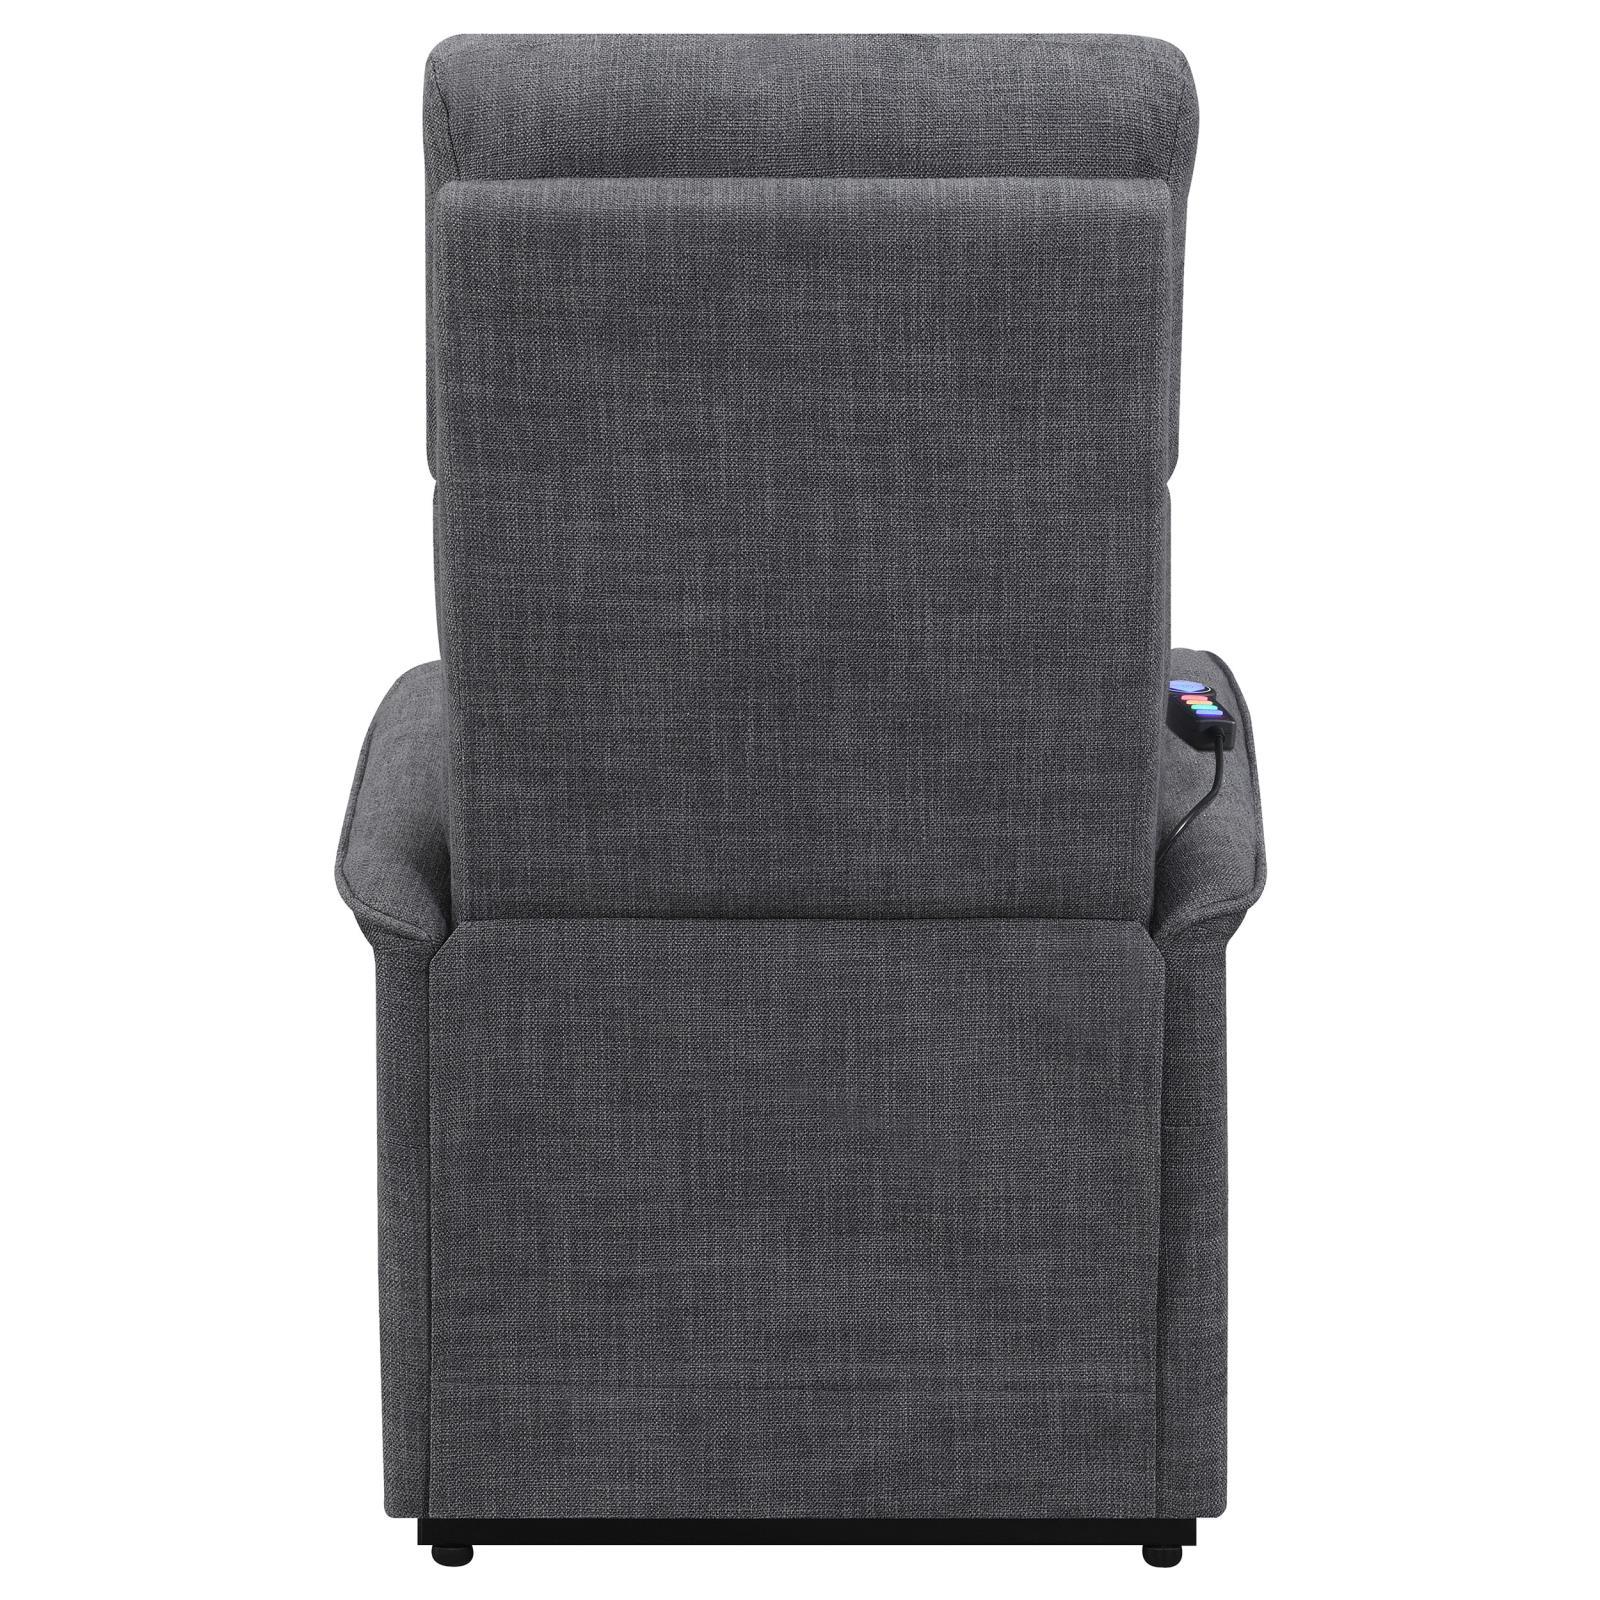 Herrera Power Lift Recliner with Wired Remote Charcoal Herrera Power Lift Recliner with Wired Remote Charcoal Half Price Furniture